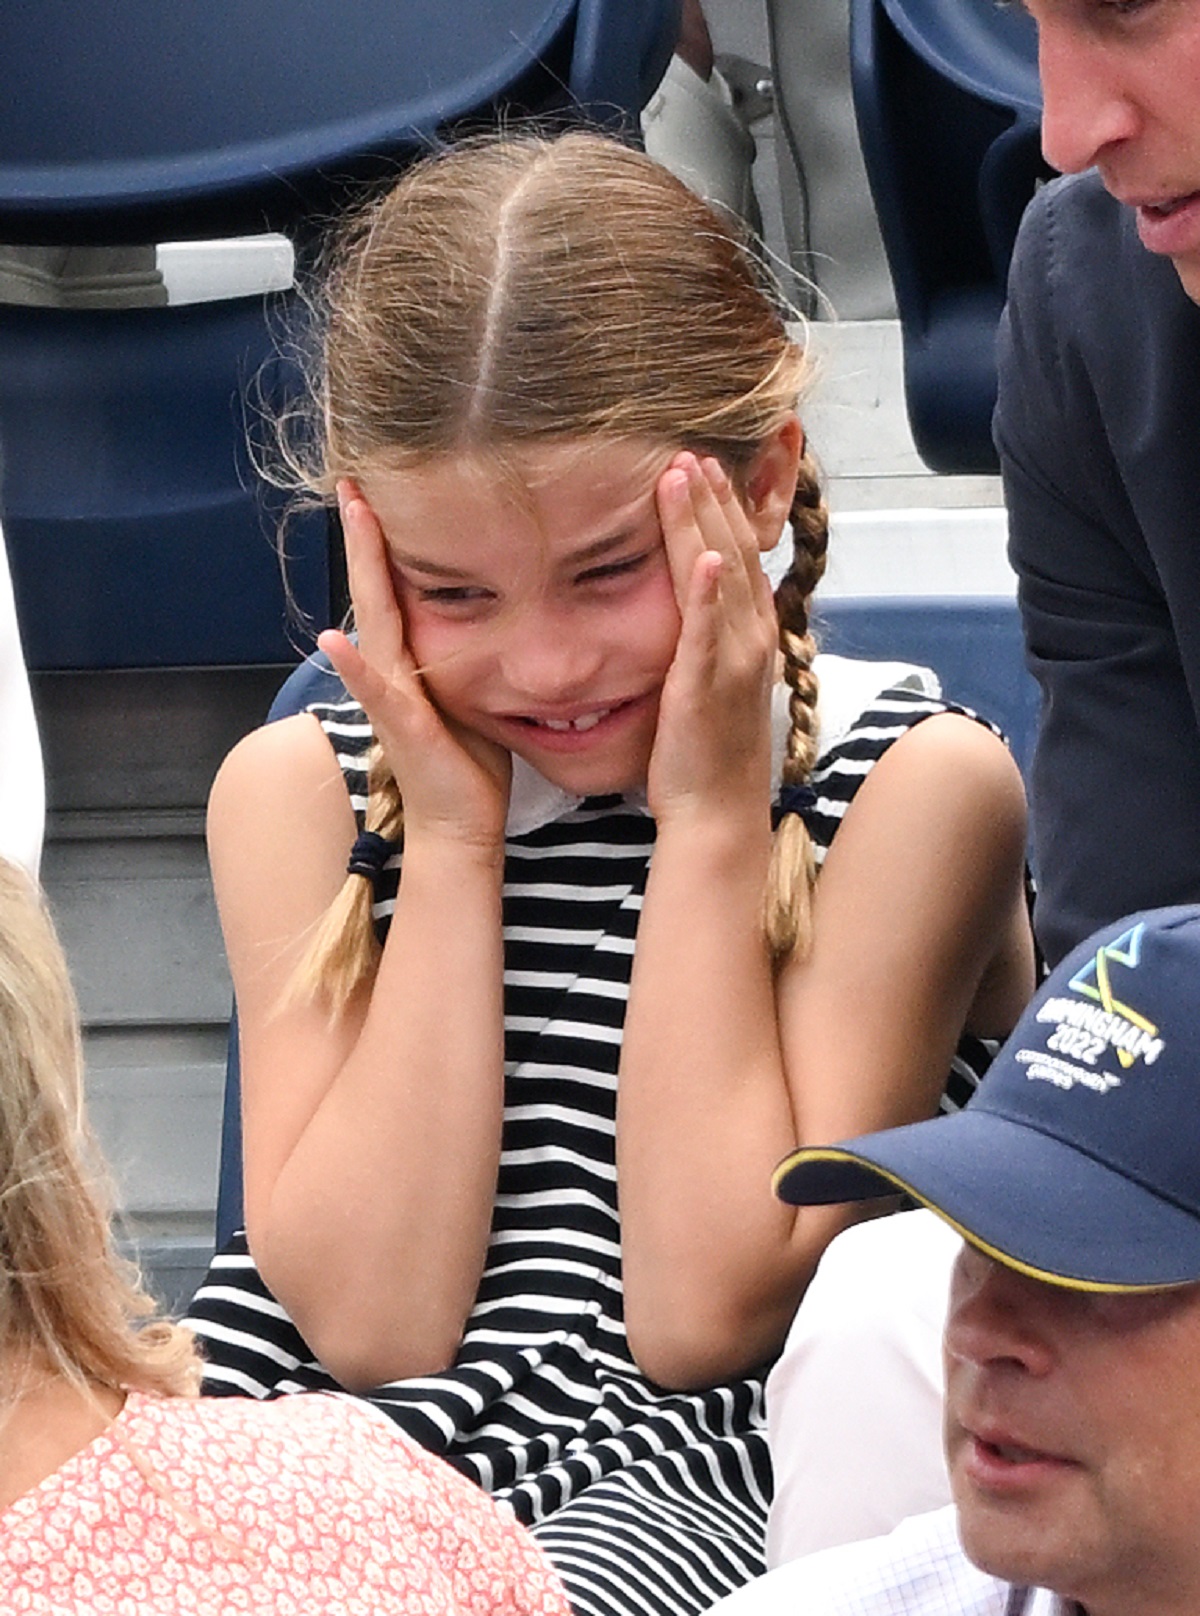 Princess Charlotte puts her hands to her face during a hockey match